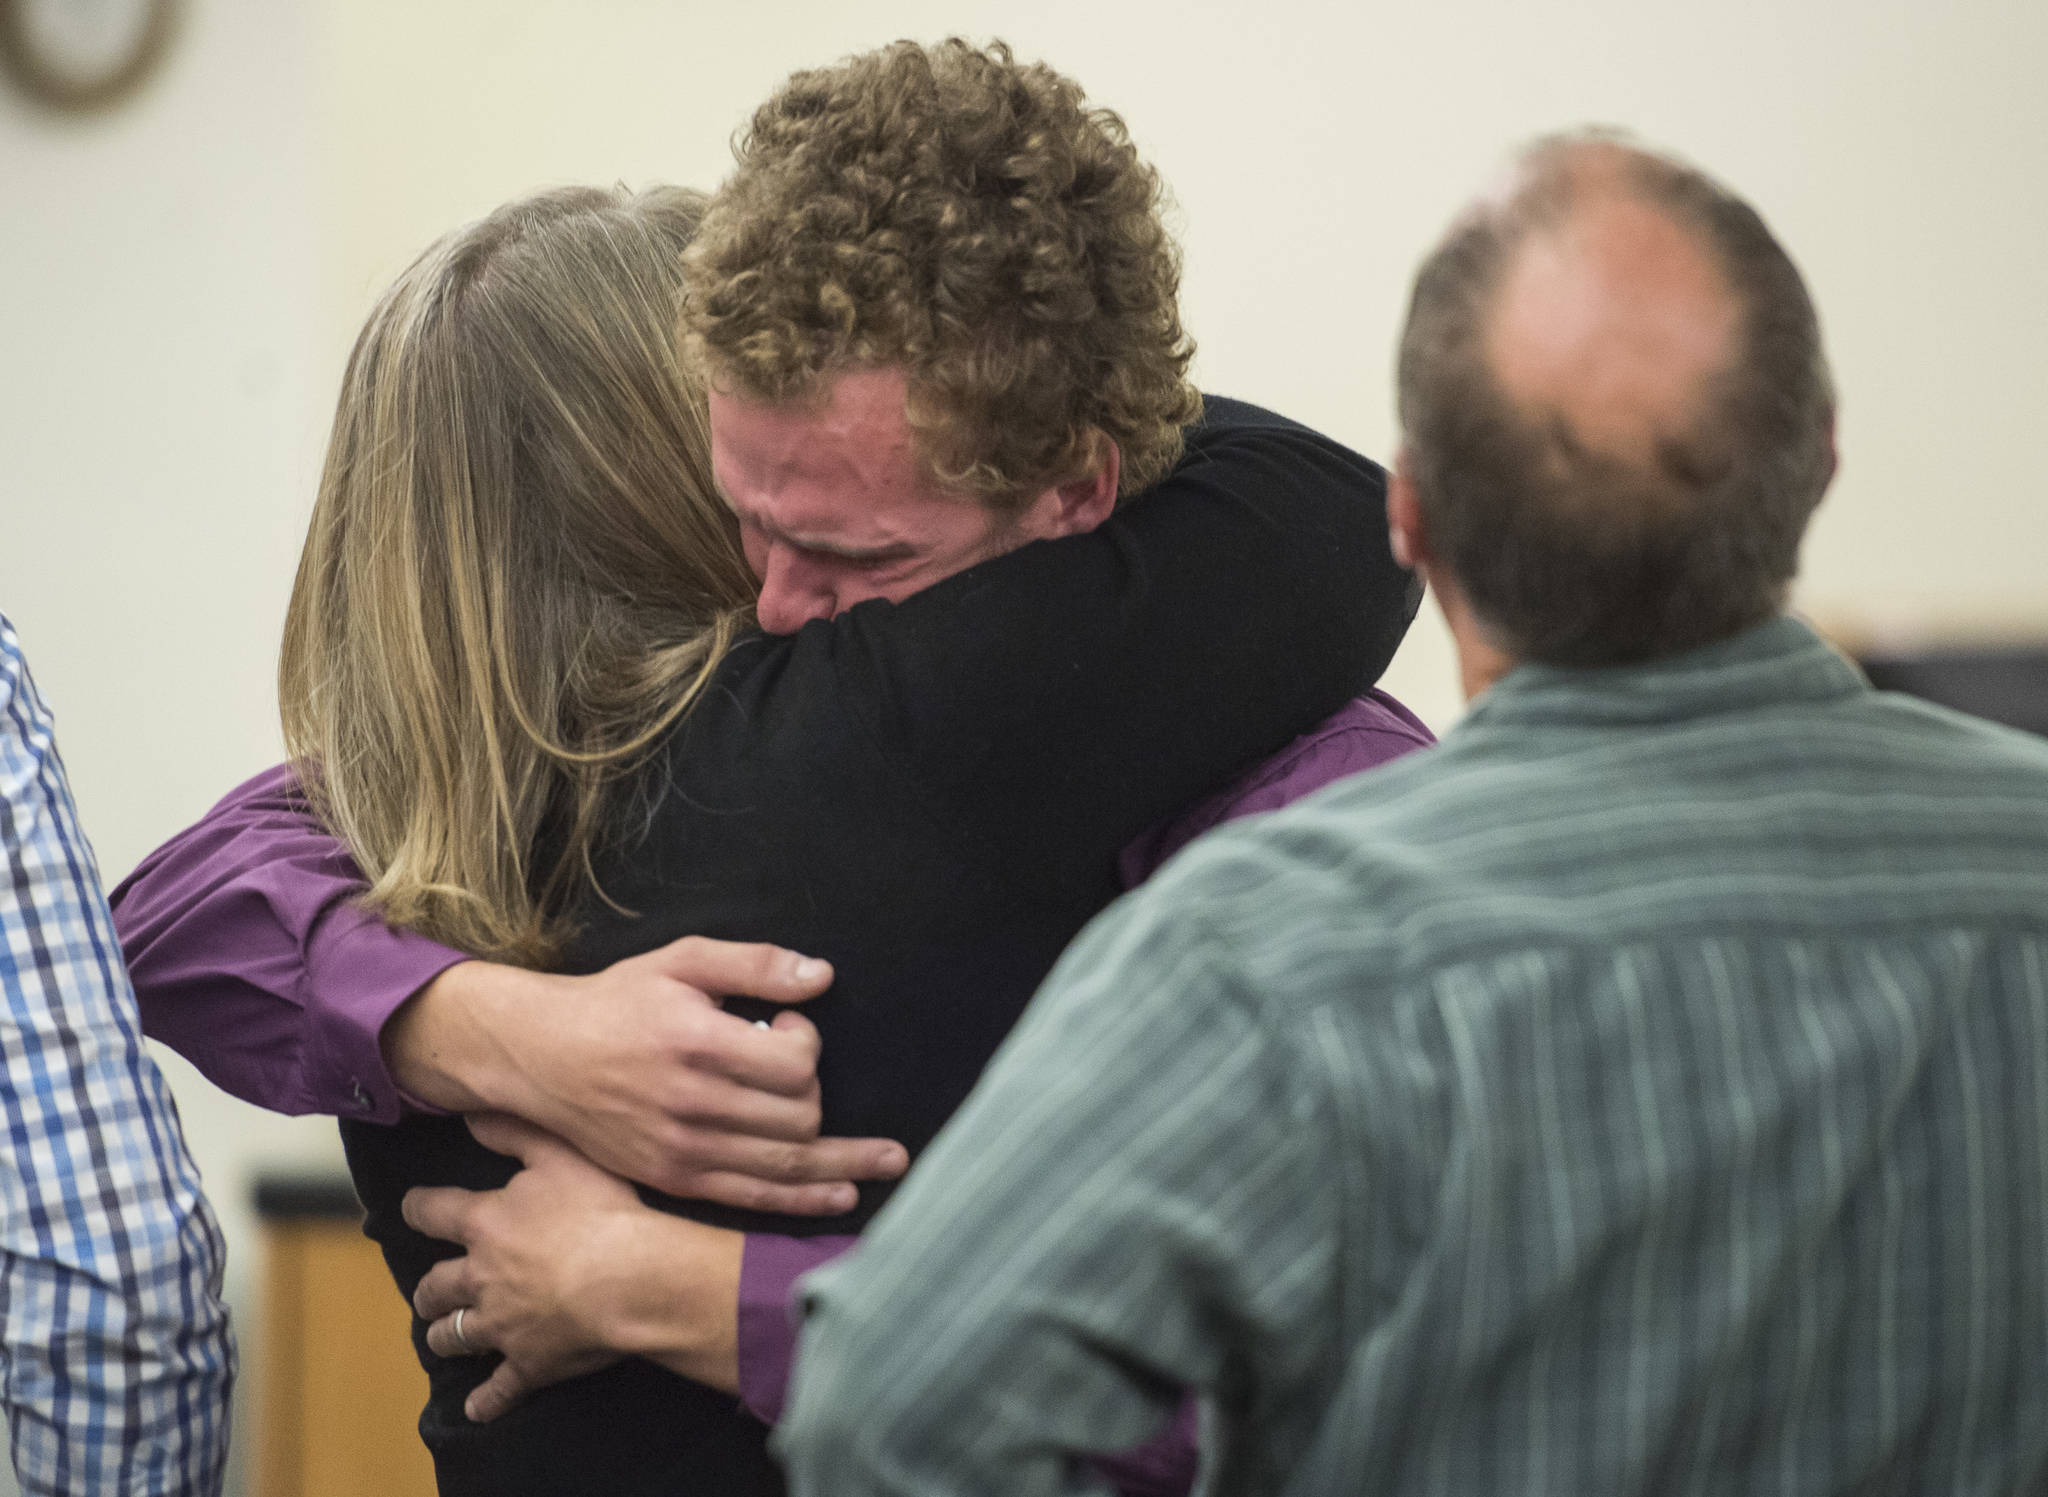 Ty Grussendorf, 24, center, hugs his parents after pleading guilty to two counts of sexual abuse of a minor in Juneau Superior Court on Monday, Oct. 22, 2018. (Michael Penn | Juneau Empire)